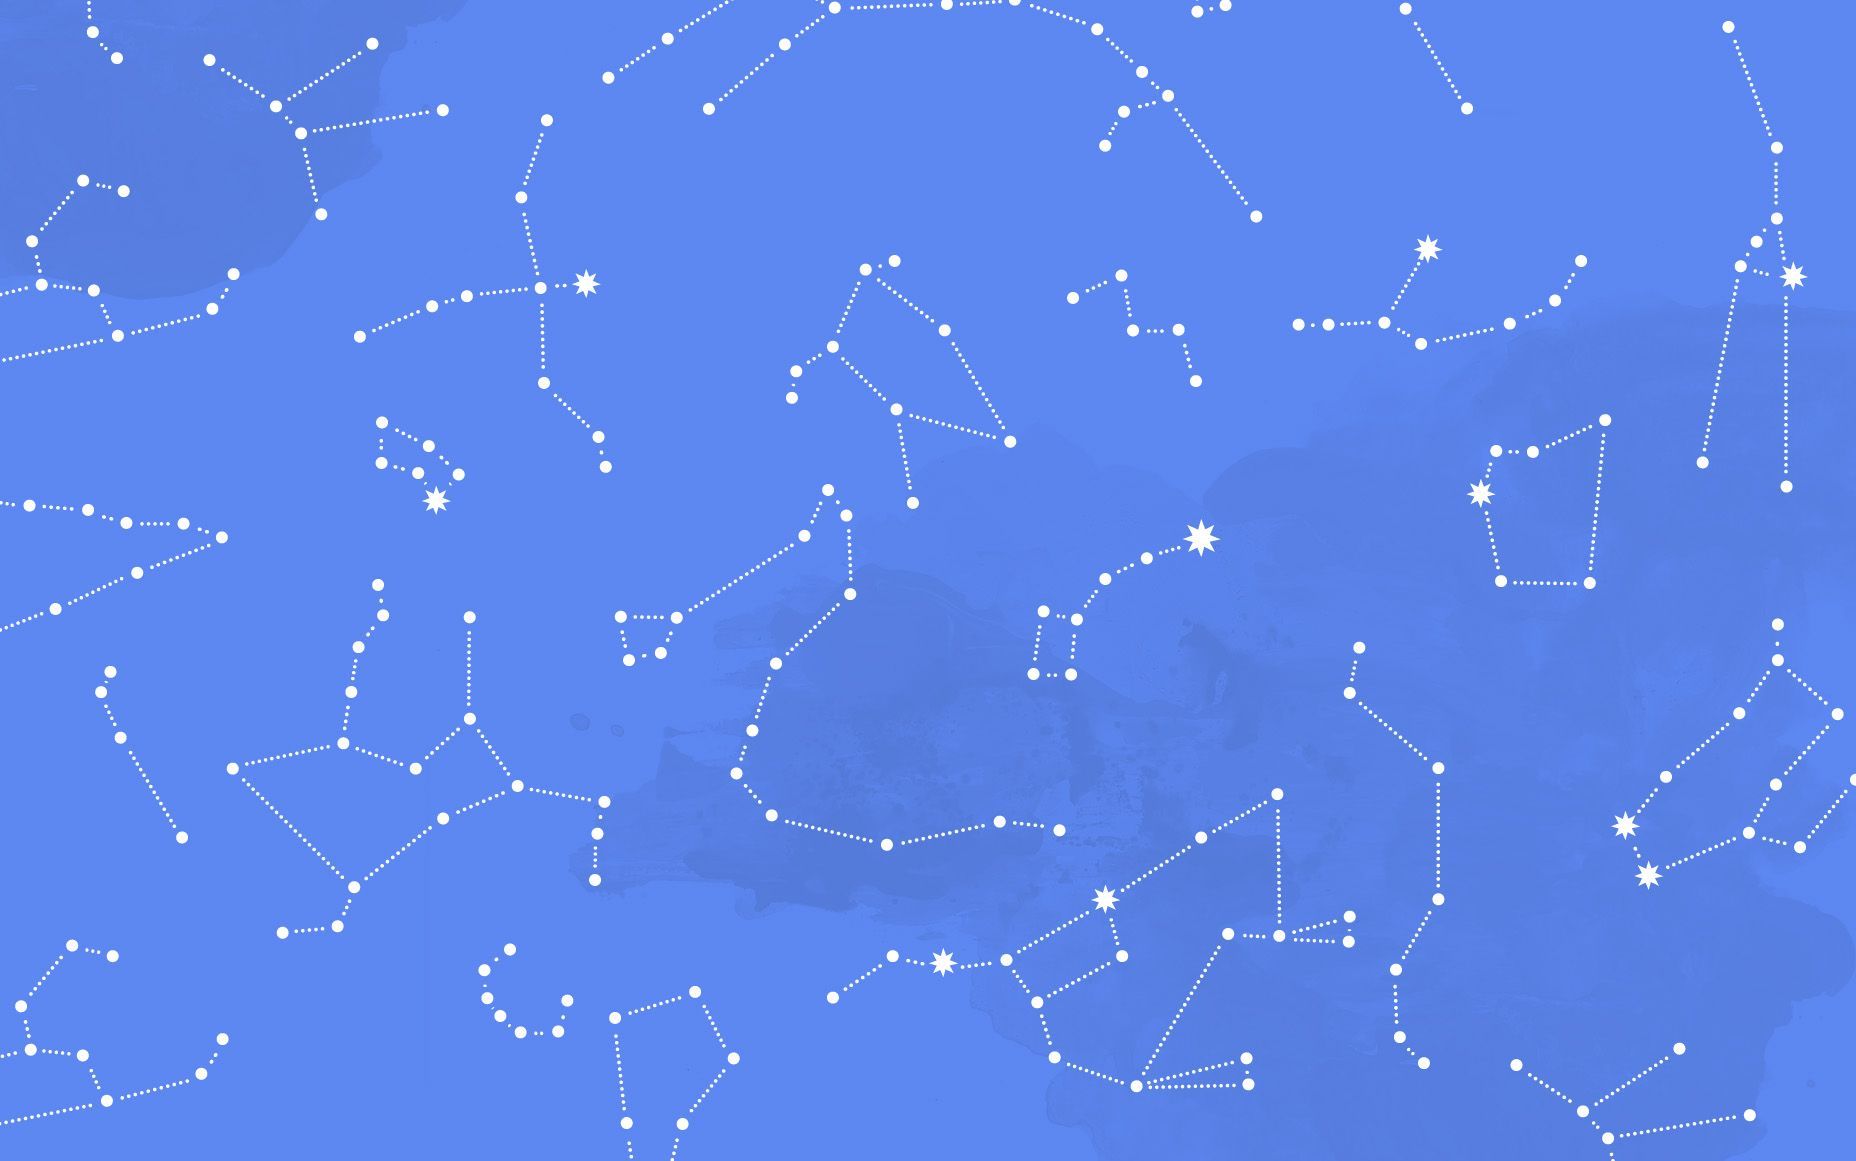 A map of stars and constellations - Constellation